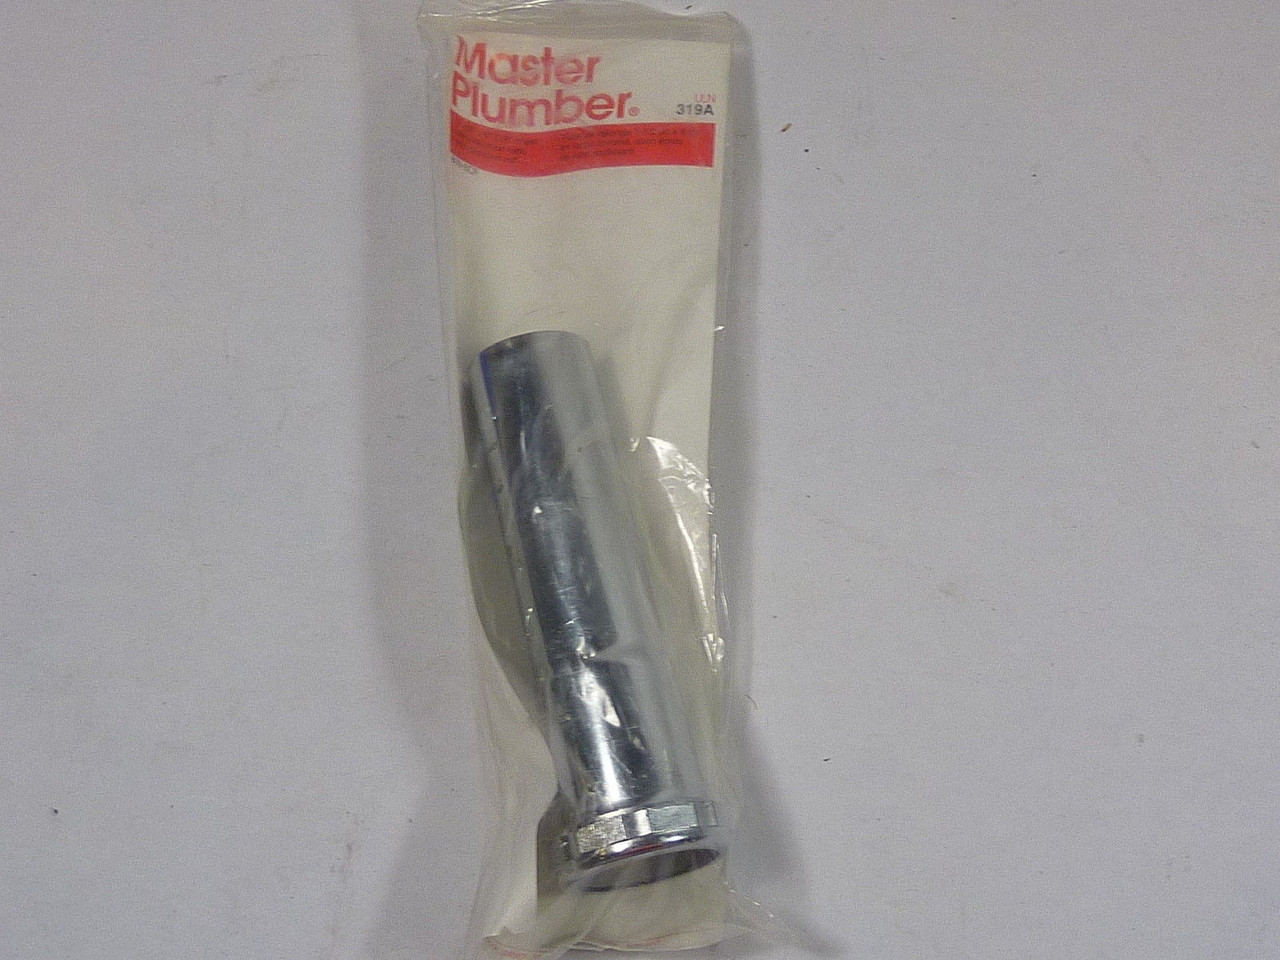 Master Plumber ULN319A Slip Extension Tube With Slip Joint Nut 1-1/2"x6 NEW